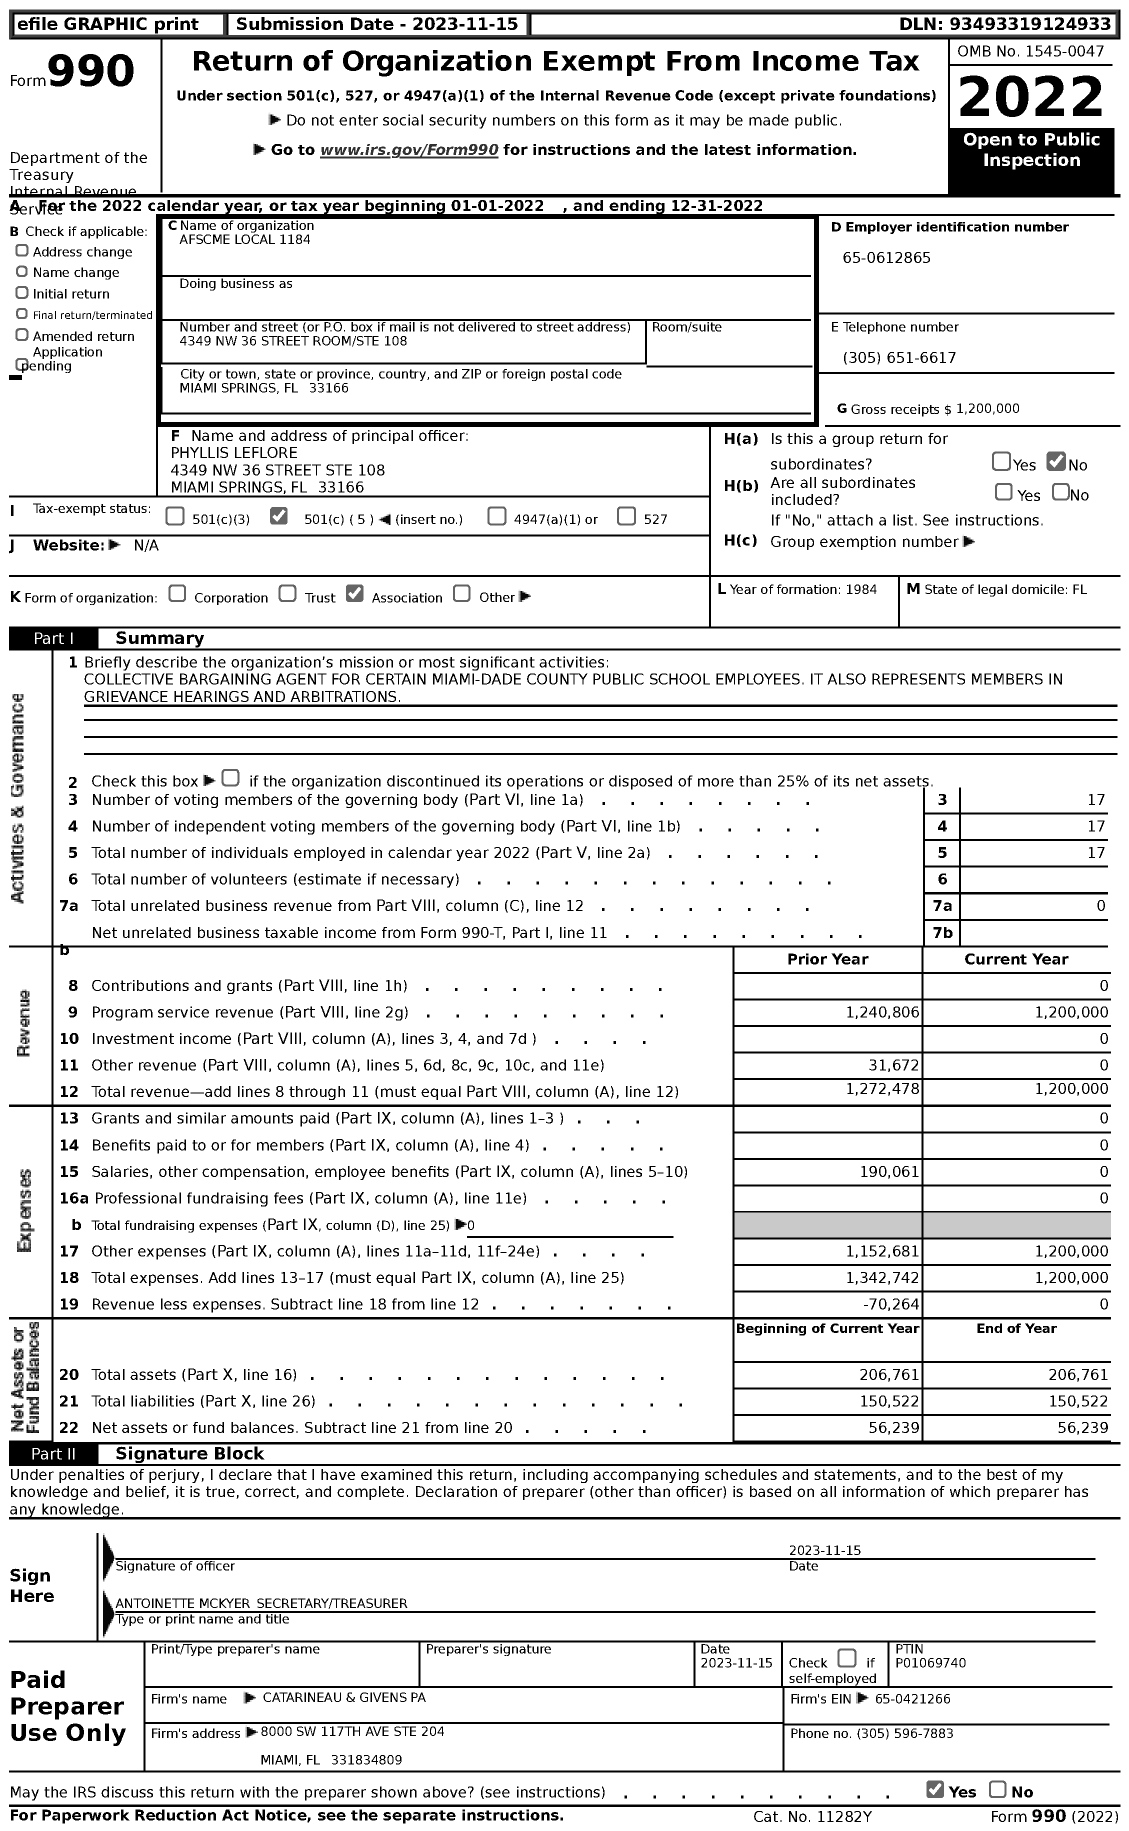 Image of first page of 2022 Form 990 for American Federation of State County & Municipal Employees - L1184FL Dade Co Fla School BD Emps